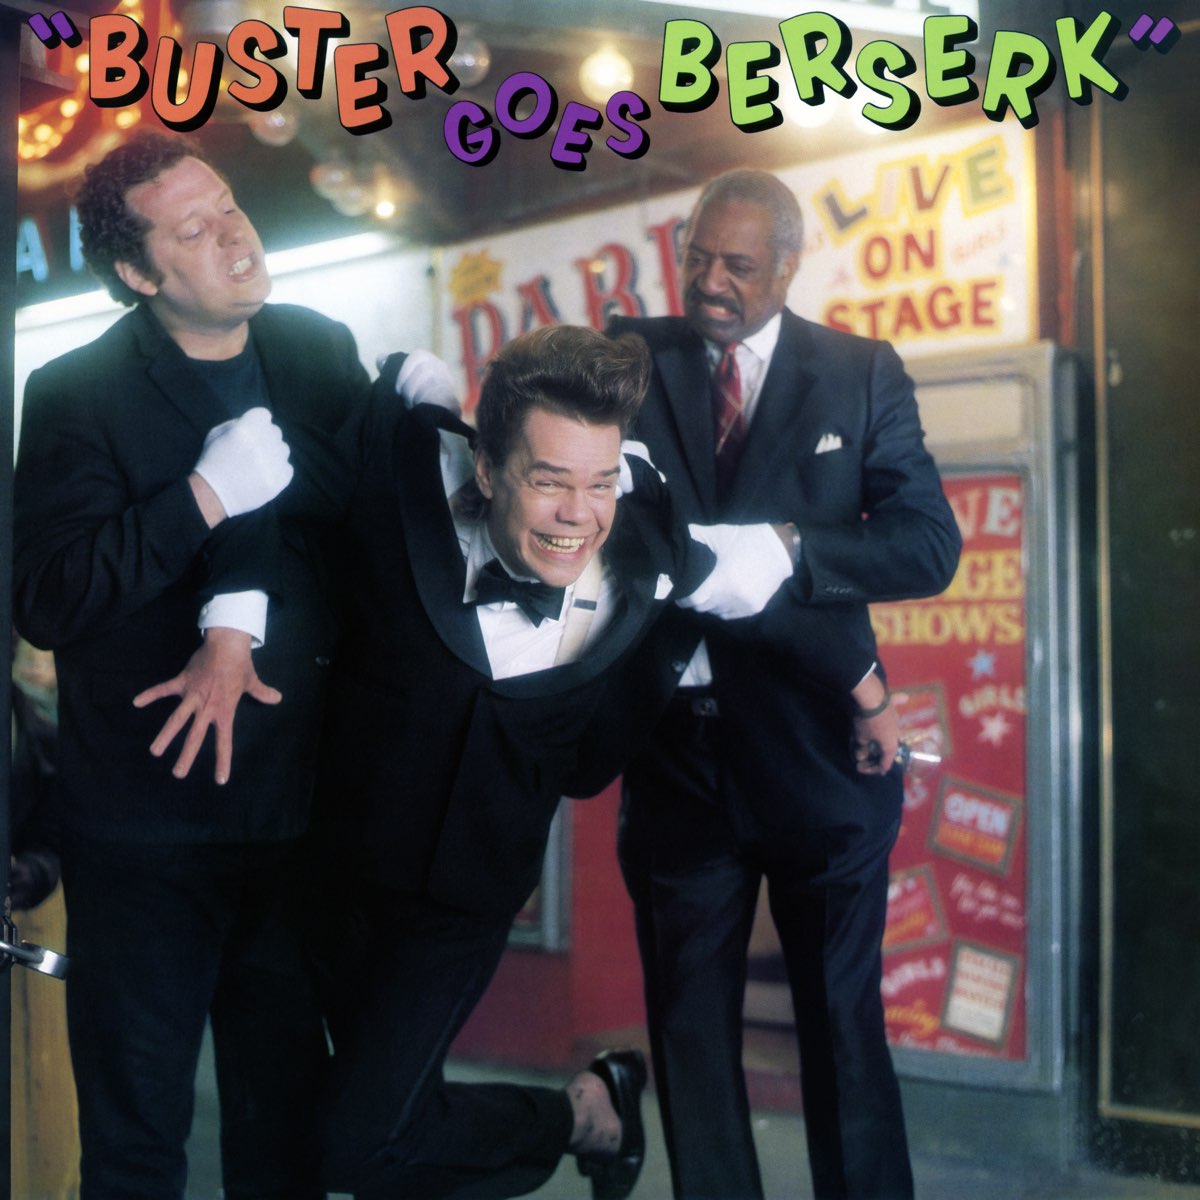 Buster Poindexter группа дискография. Песни Бастер. Buster Poindexter and his Banshees of Blue. Buster goes to. Baster песня